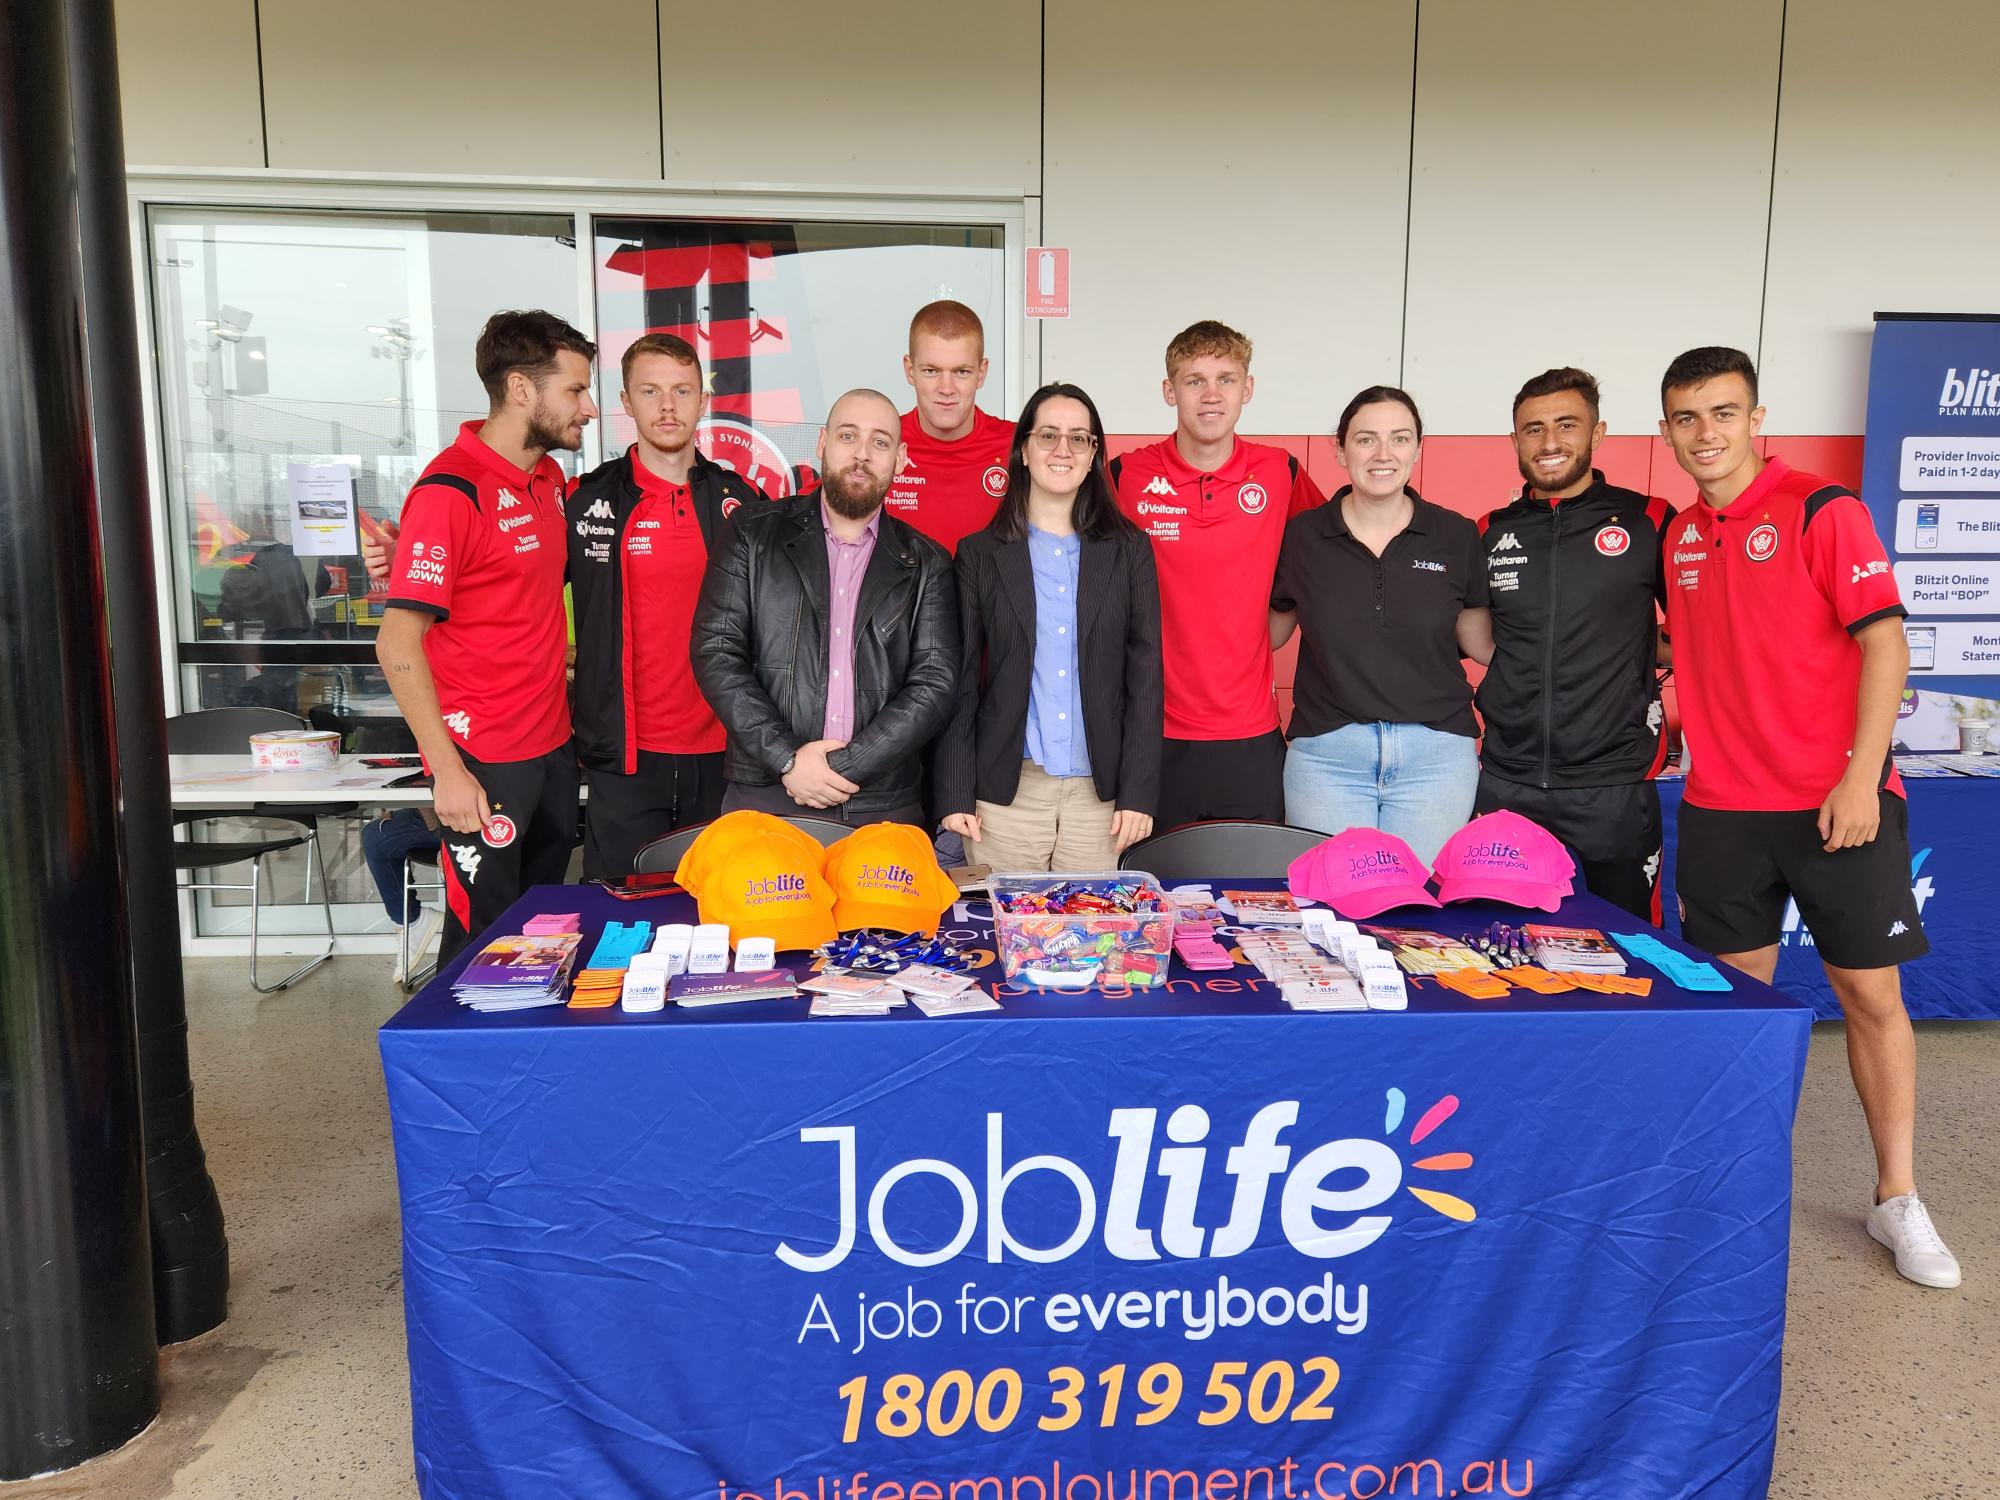 uLaunch - photo of a group of workers dressed in red and black behind a table with 'Joblife' on the banner